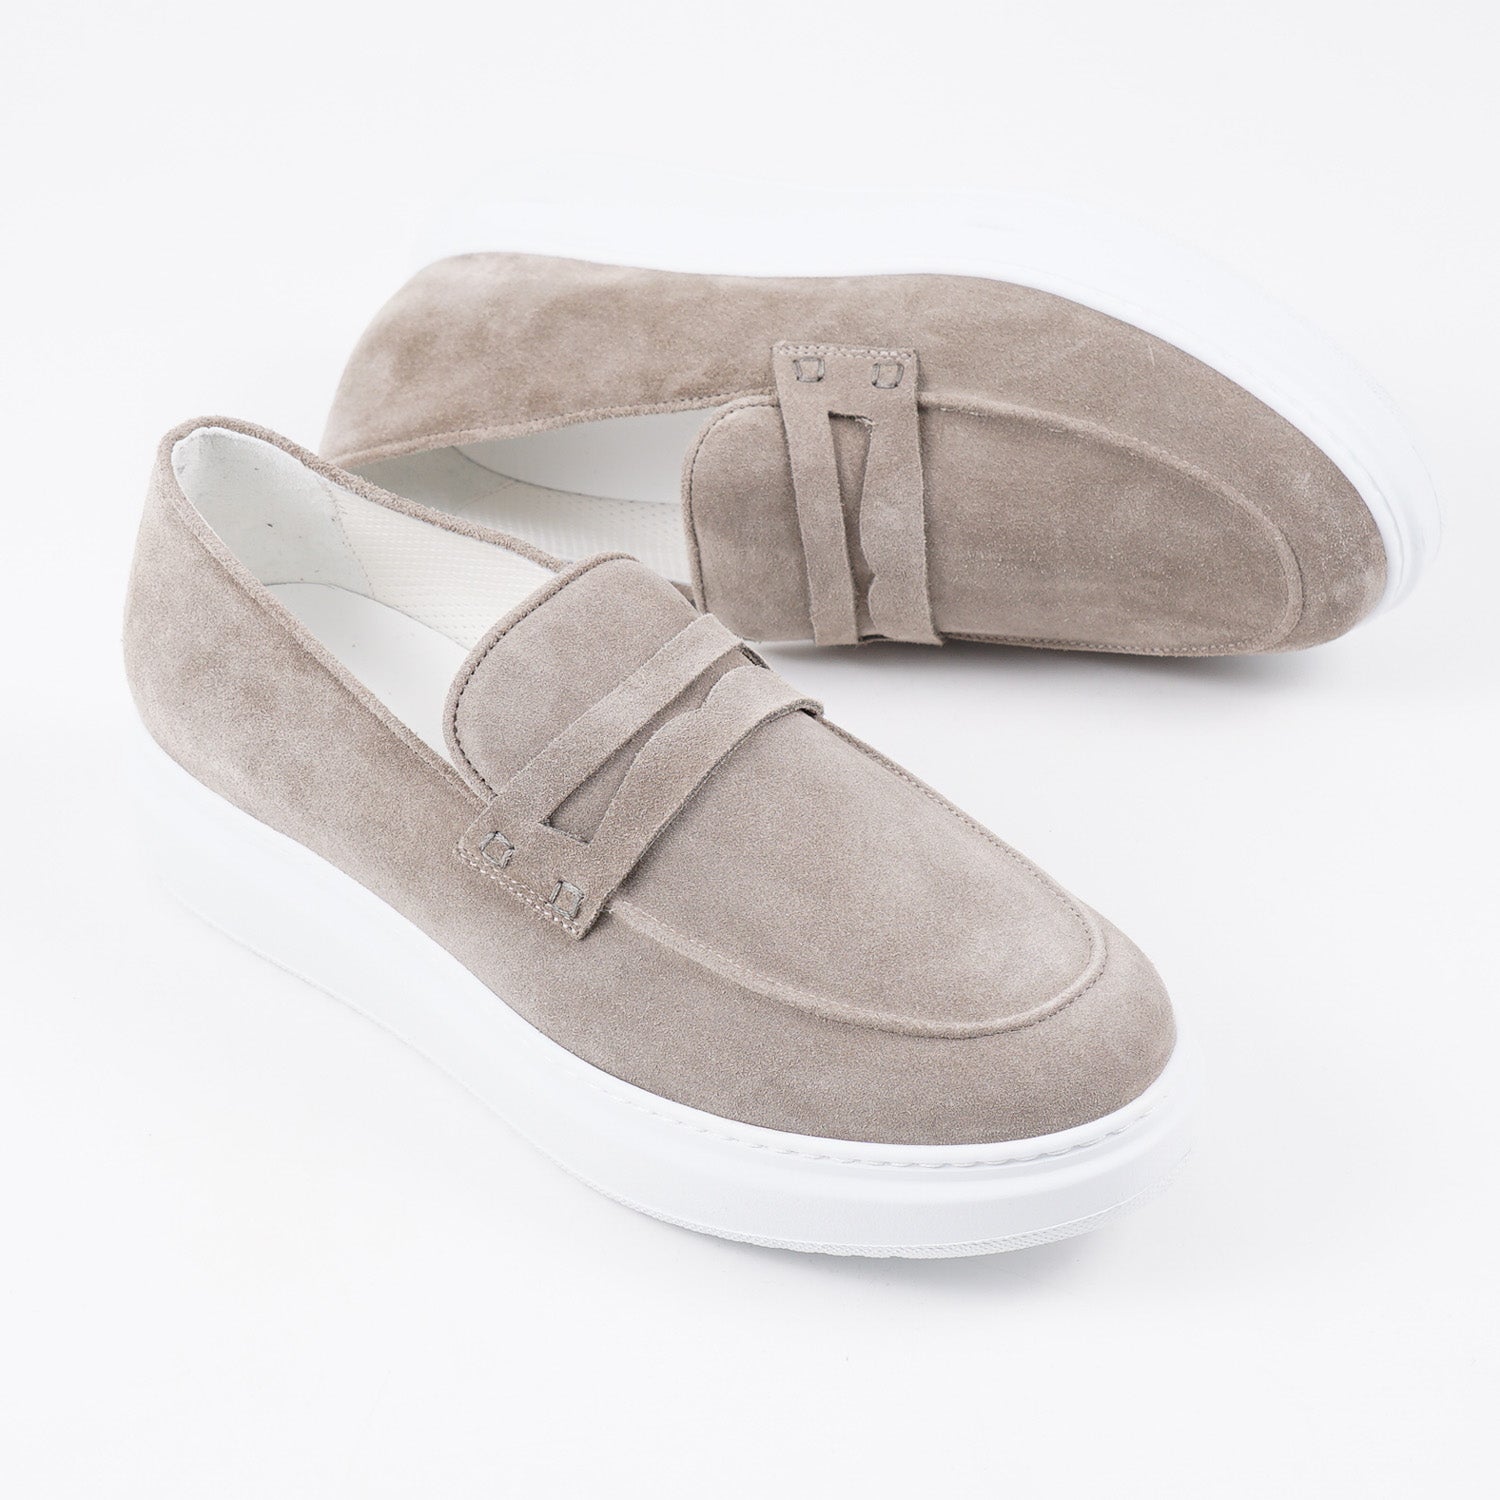 Kiton Casual Slip-On Suede Loafers - Top Shelf Apparel